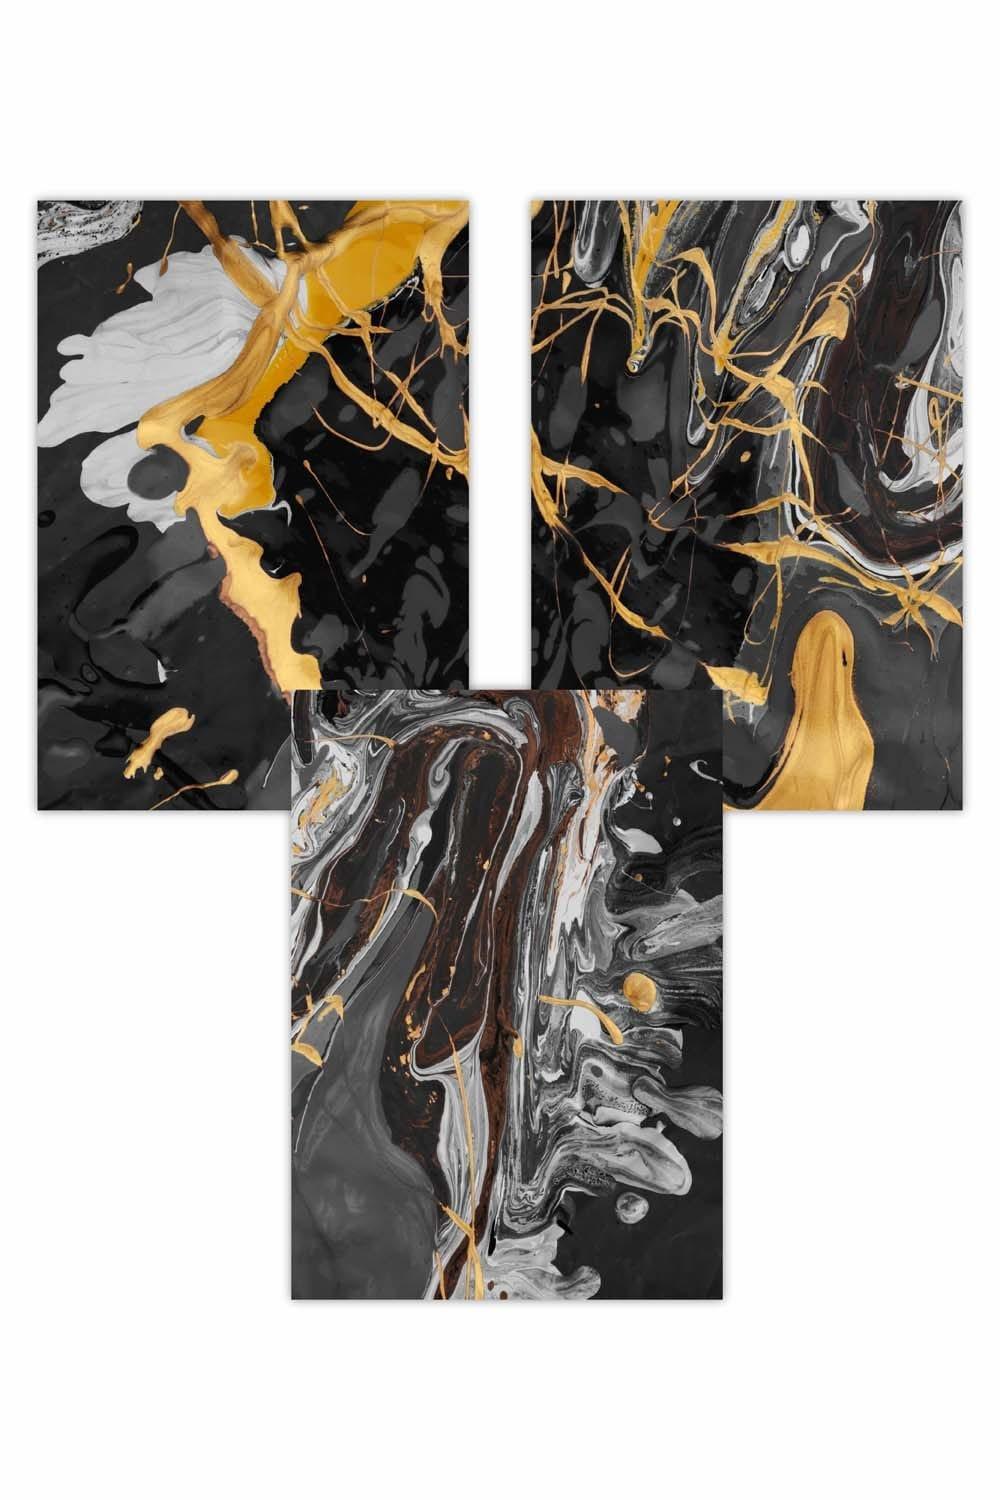 Set of 3 Abstract Black and Yellow Fluid Splatters Art Posters